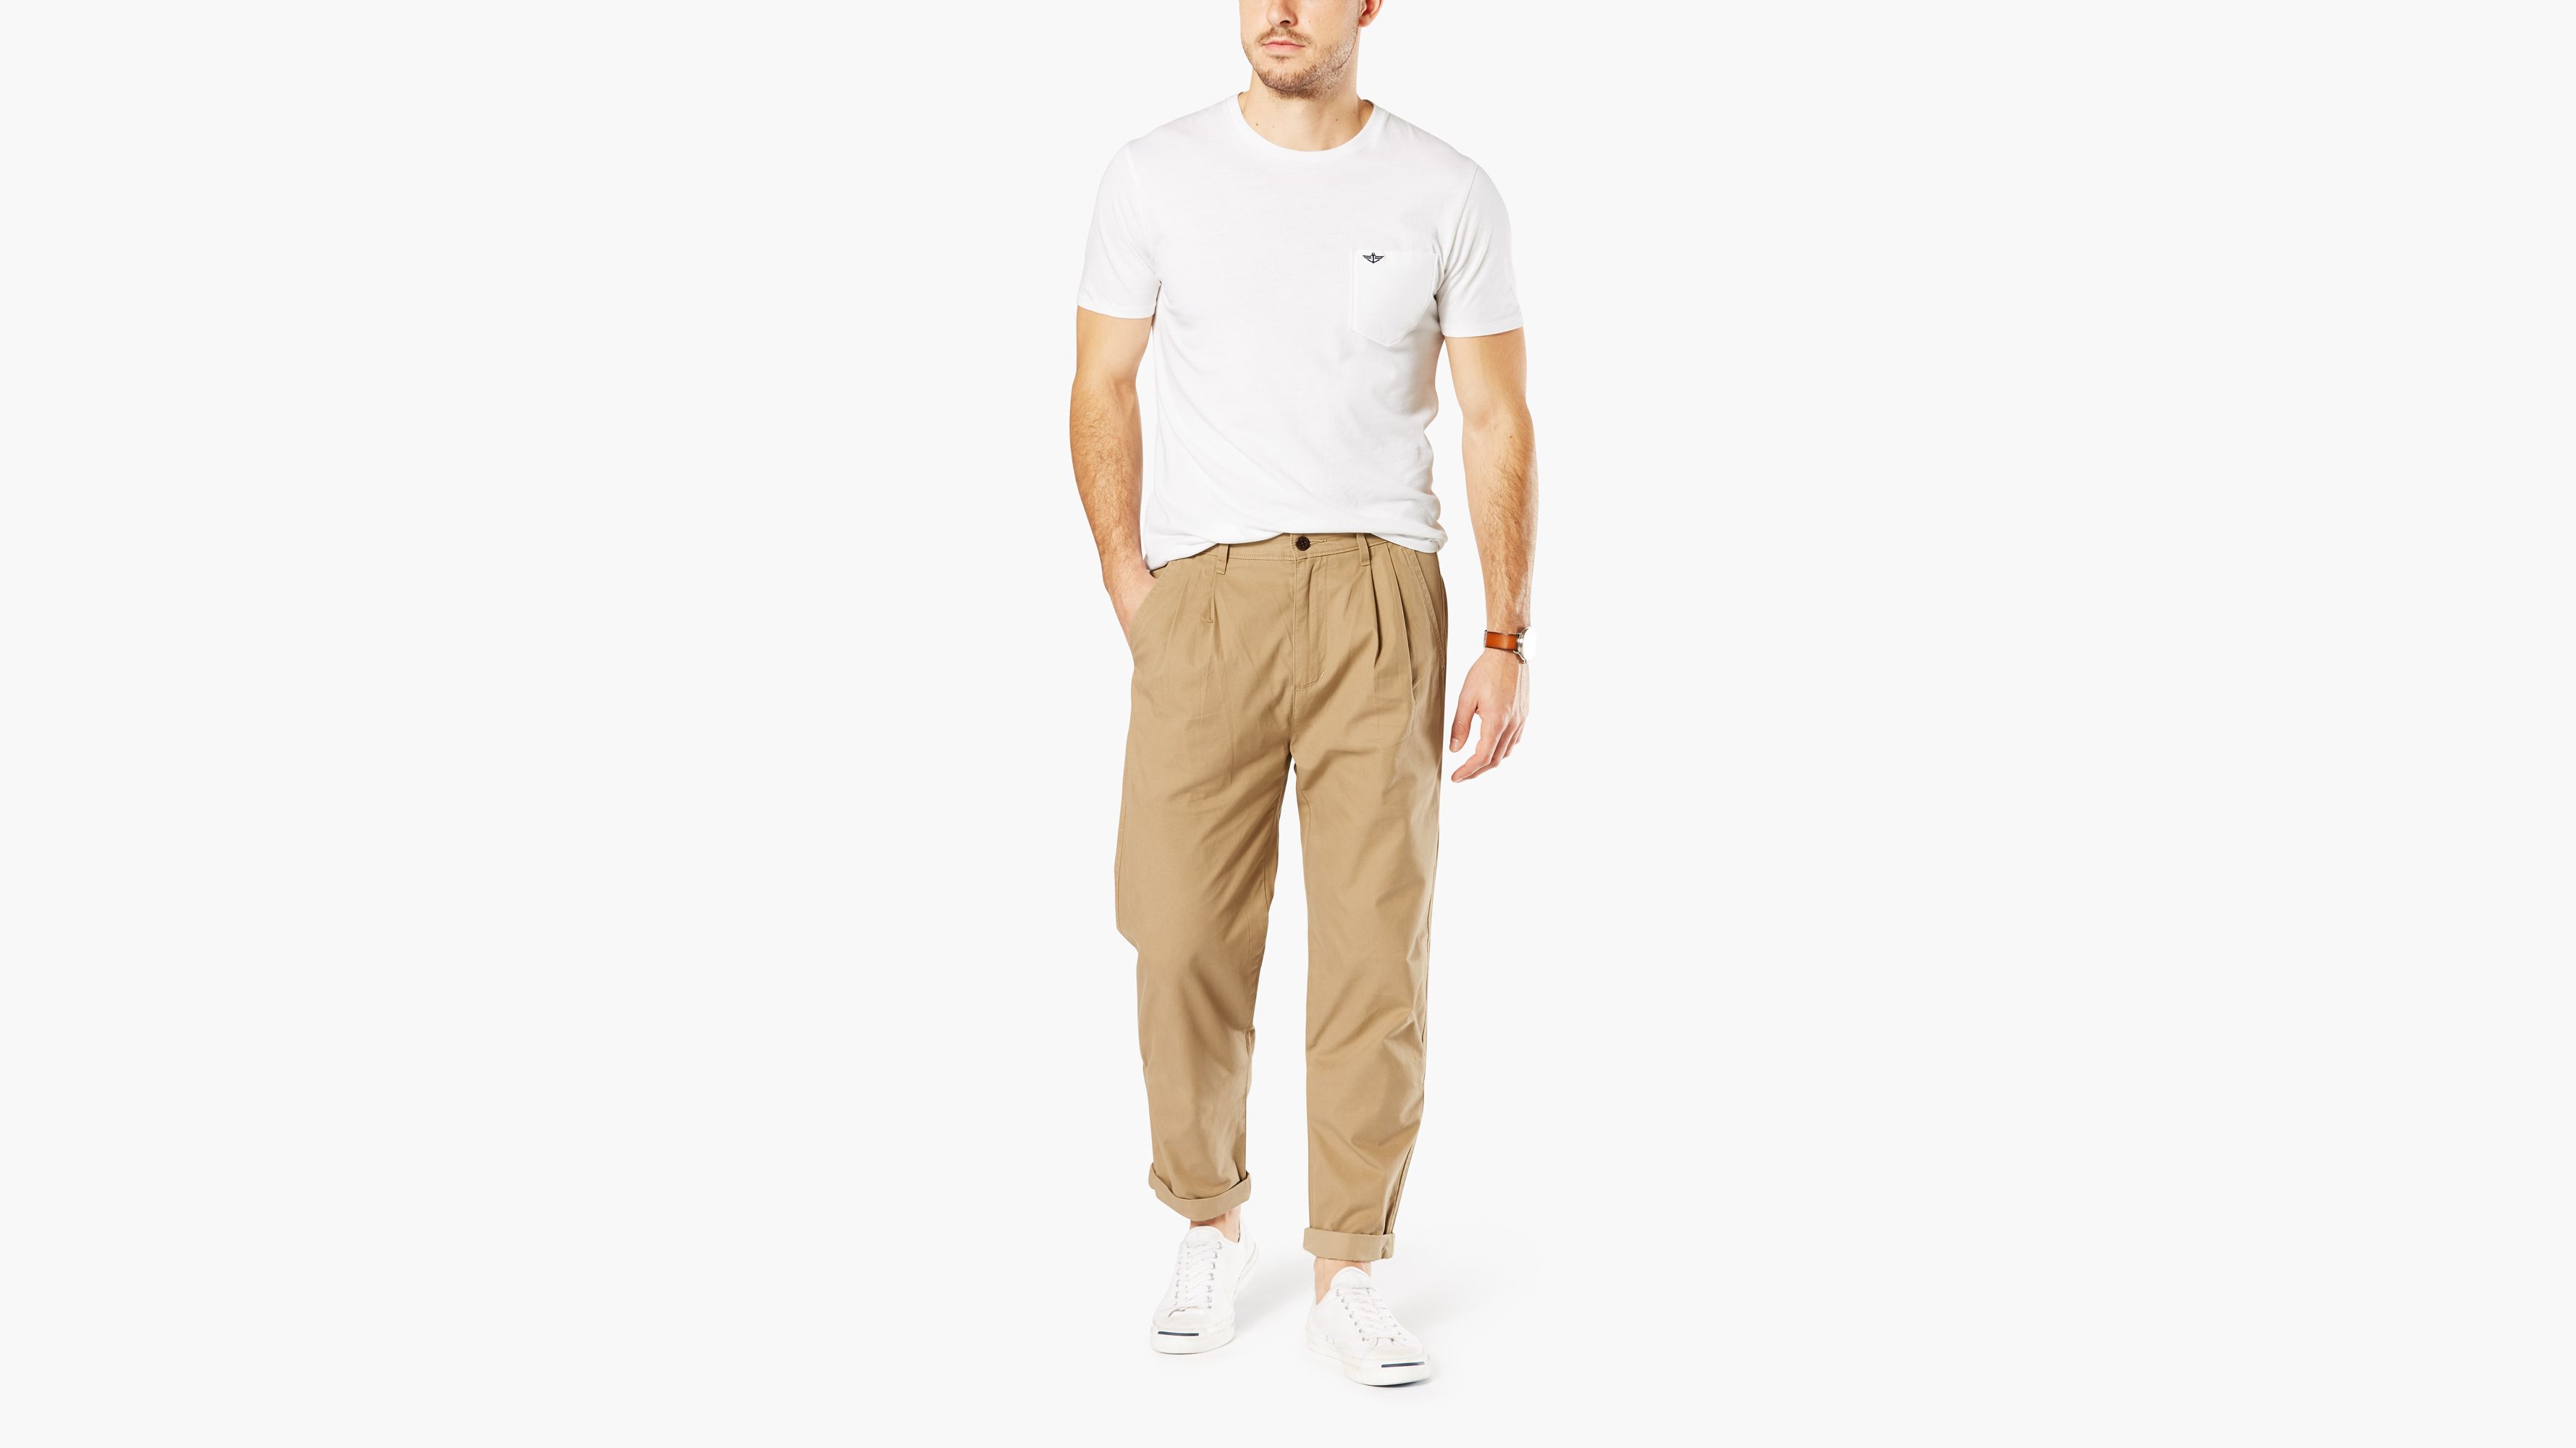 Casual Pants Directory of Bottoms, Men's Clothing